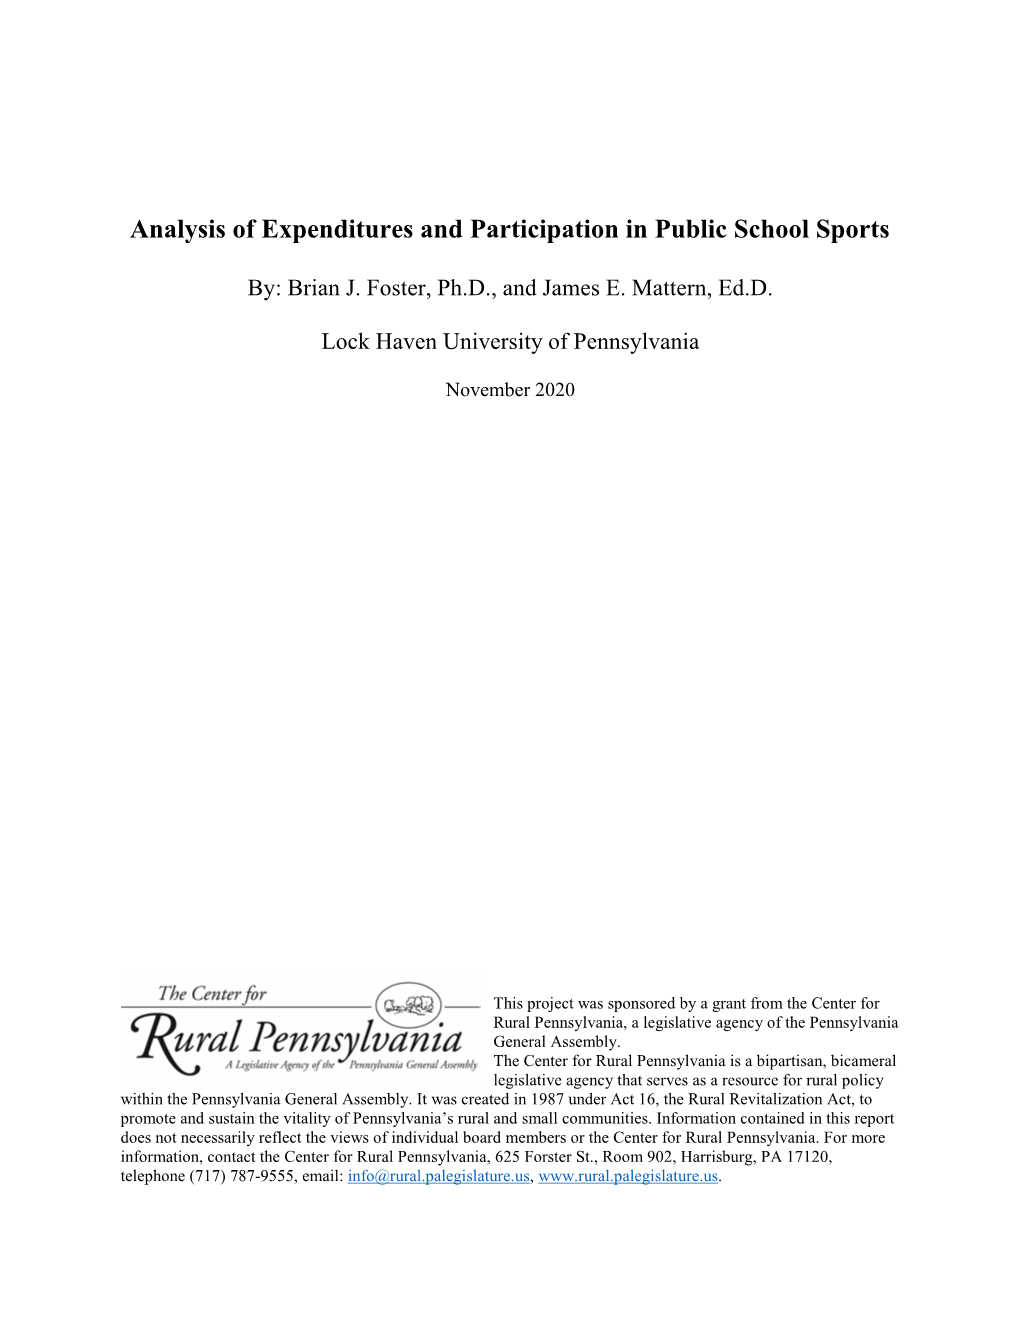 Analysis of Expenditures and Participation in Public School Sports